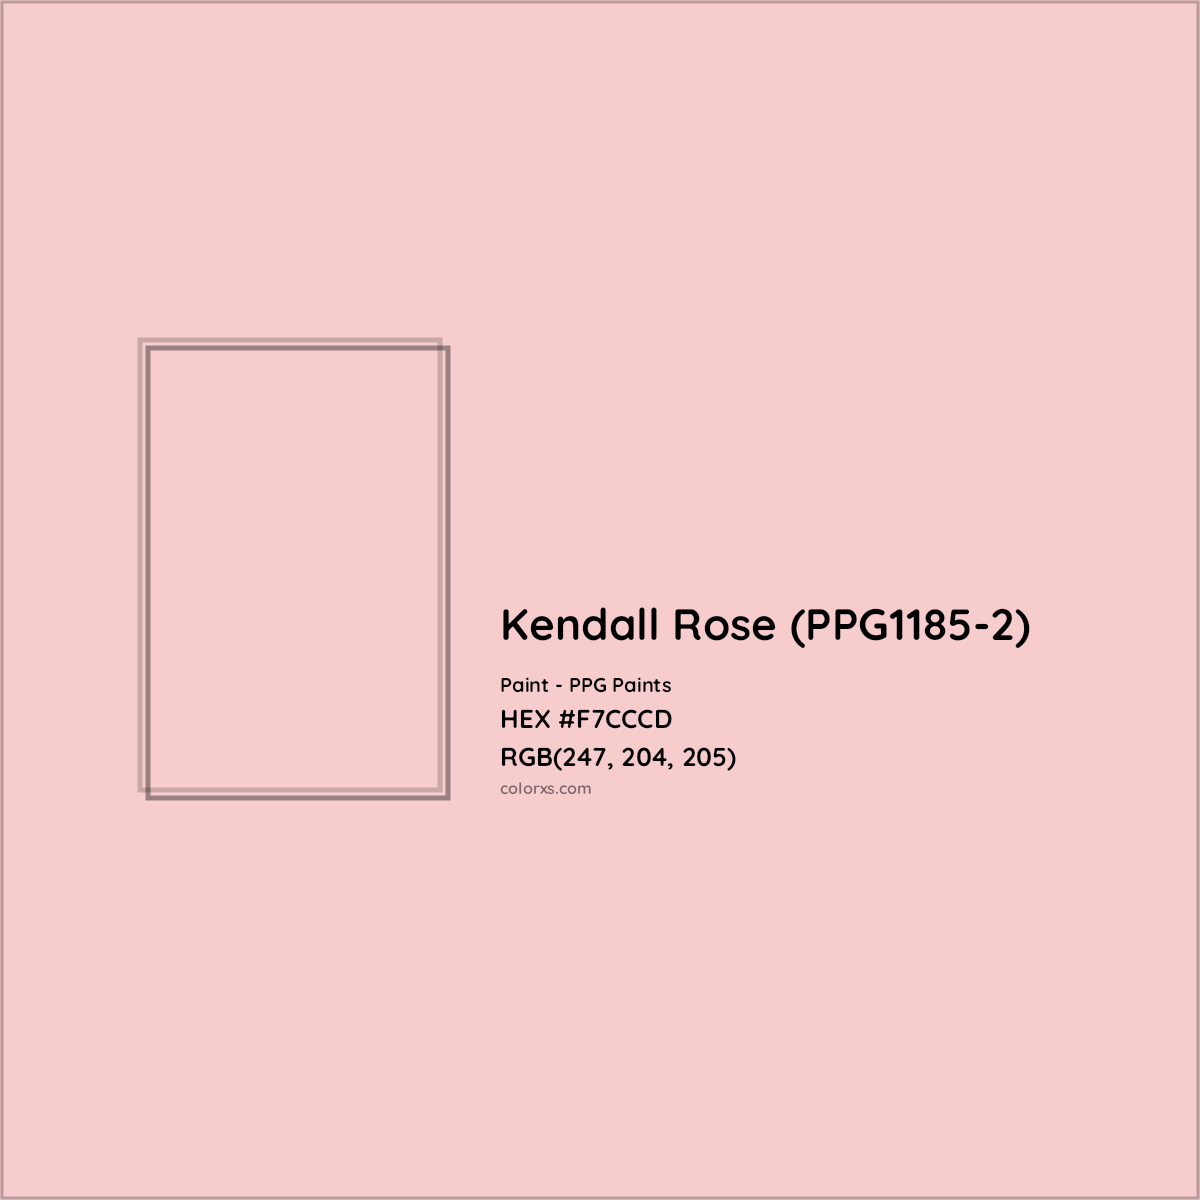 HEX #F7CCCD Kendall Rose (PPG1185-2) Paint PPG Paints - Color Code